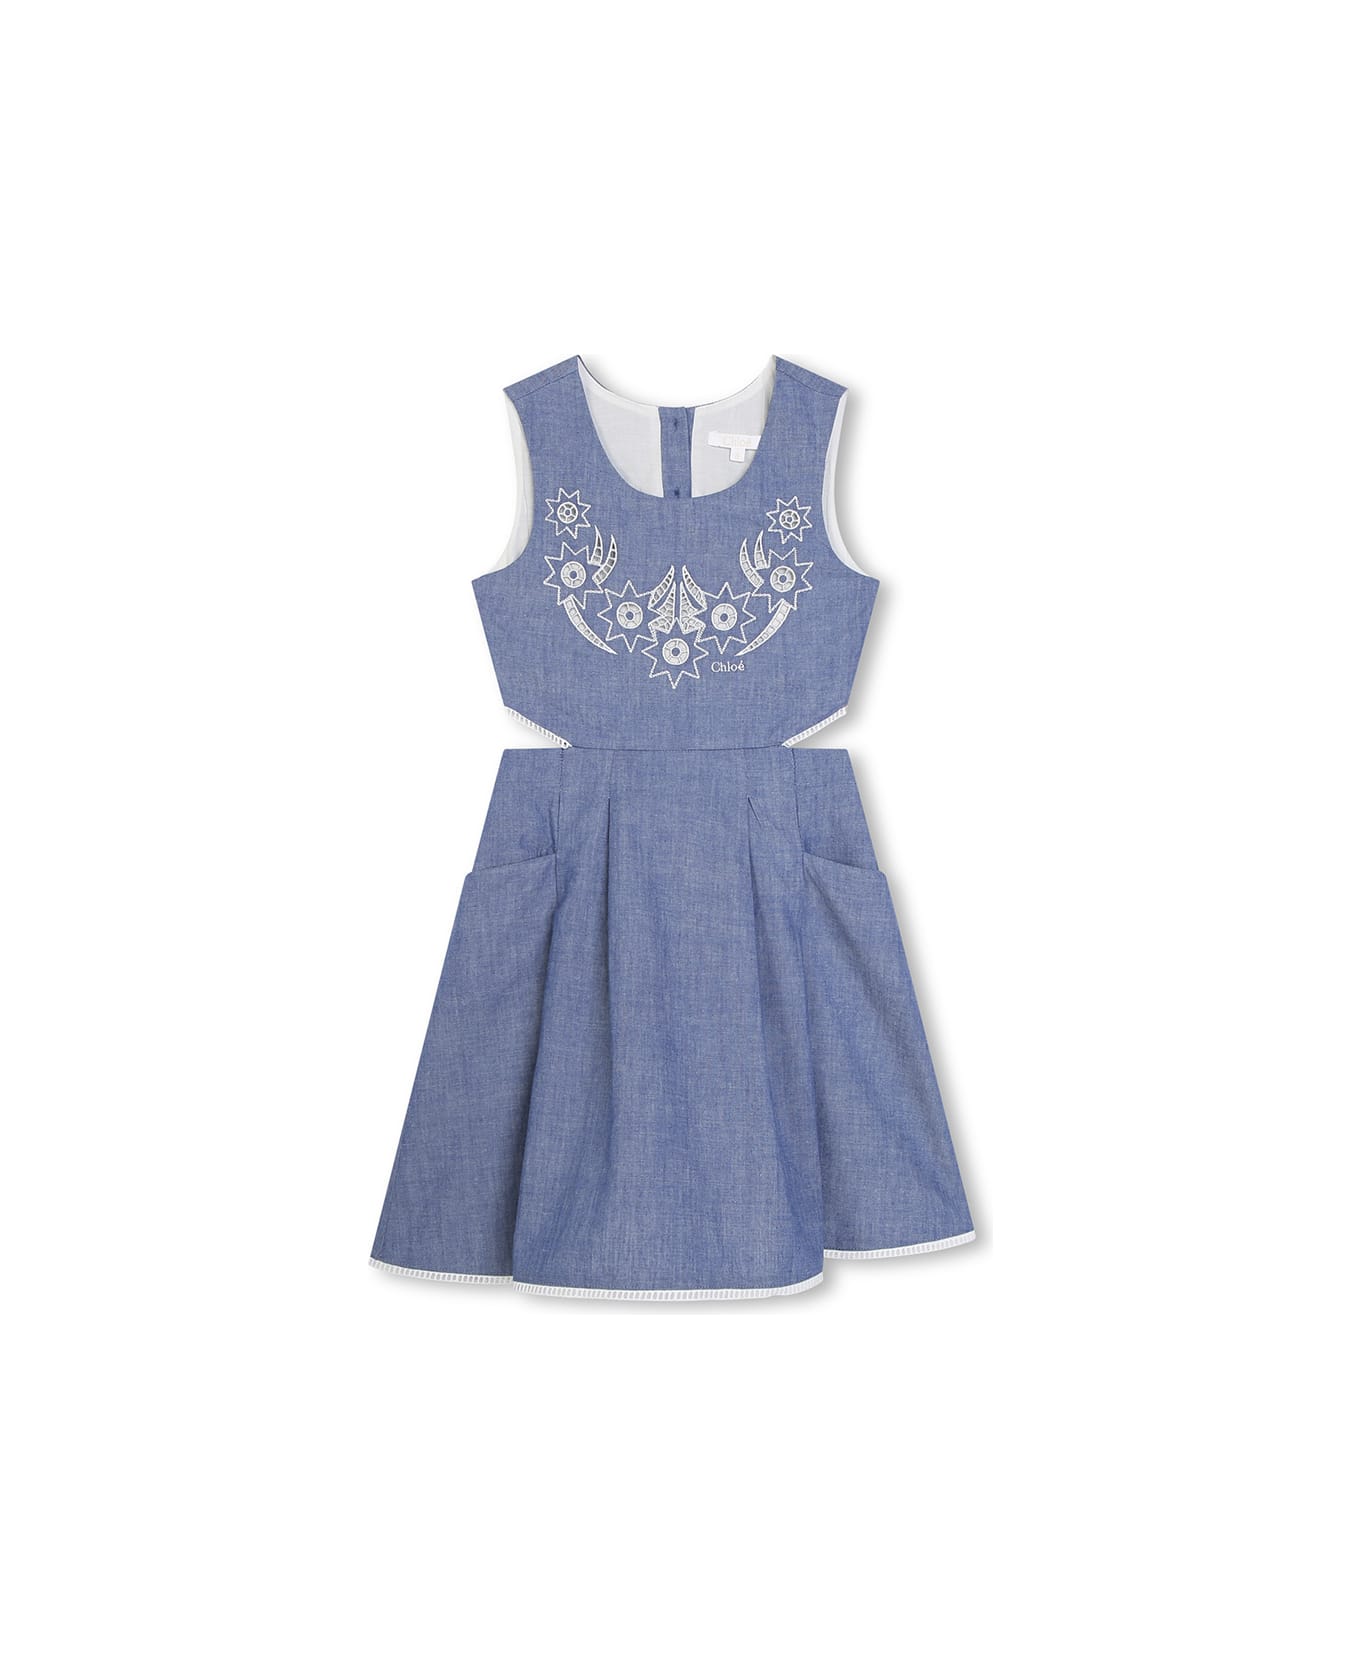 Chloé Medium Blue Sleeveless Dress With Embroidery And Cut-out - Blue